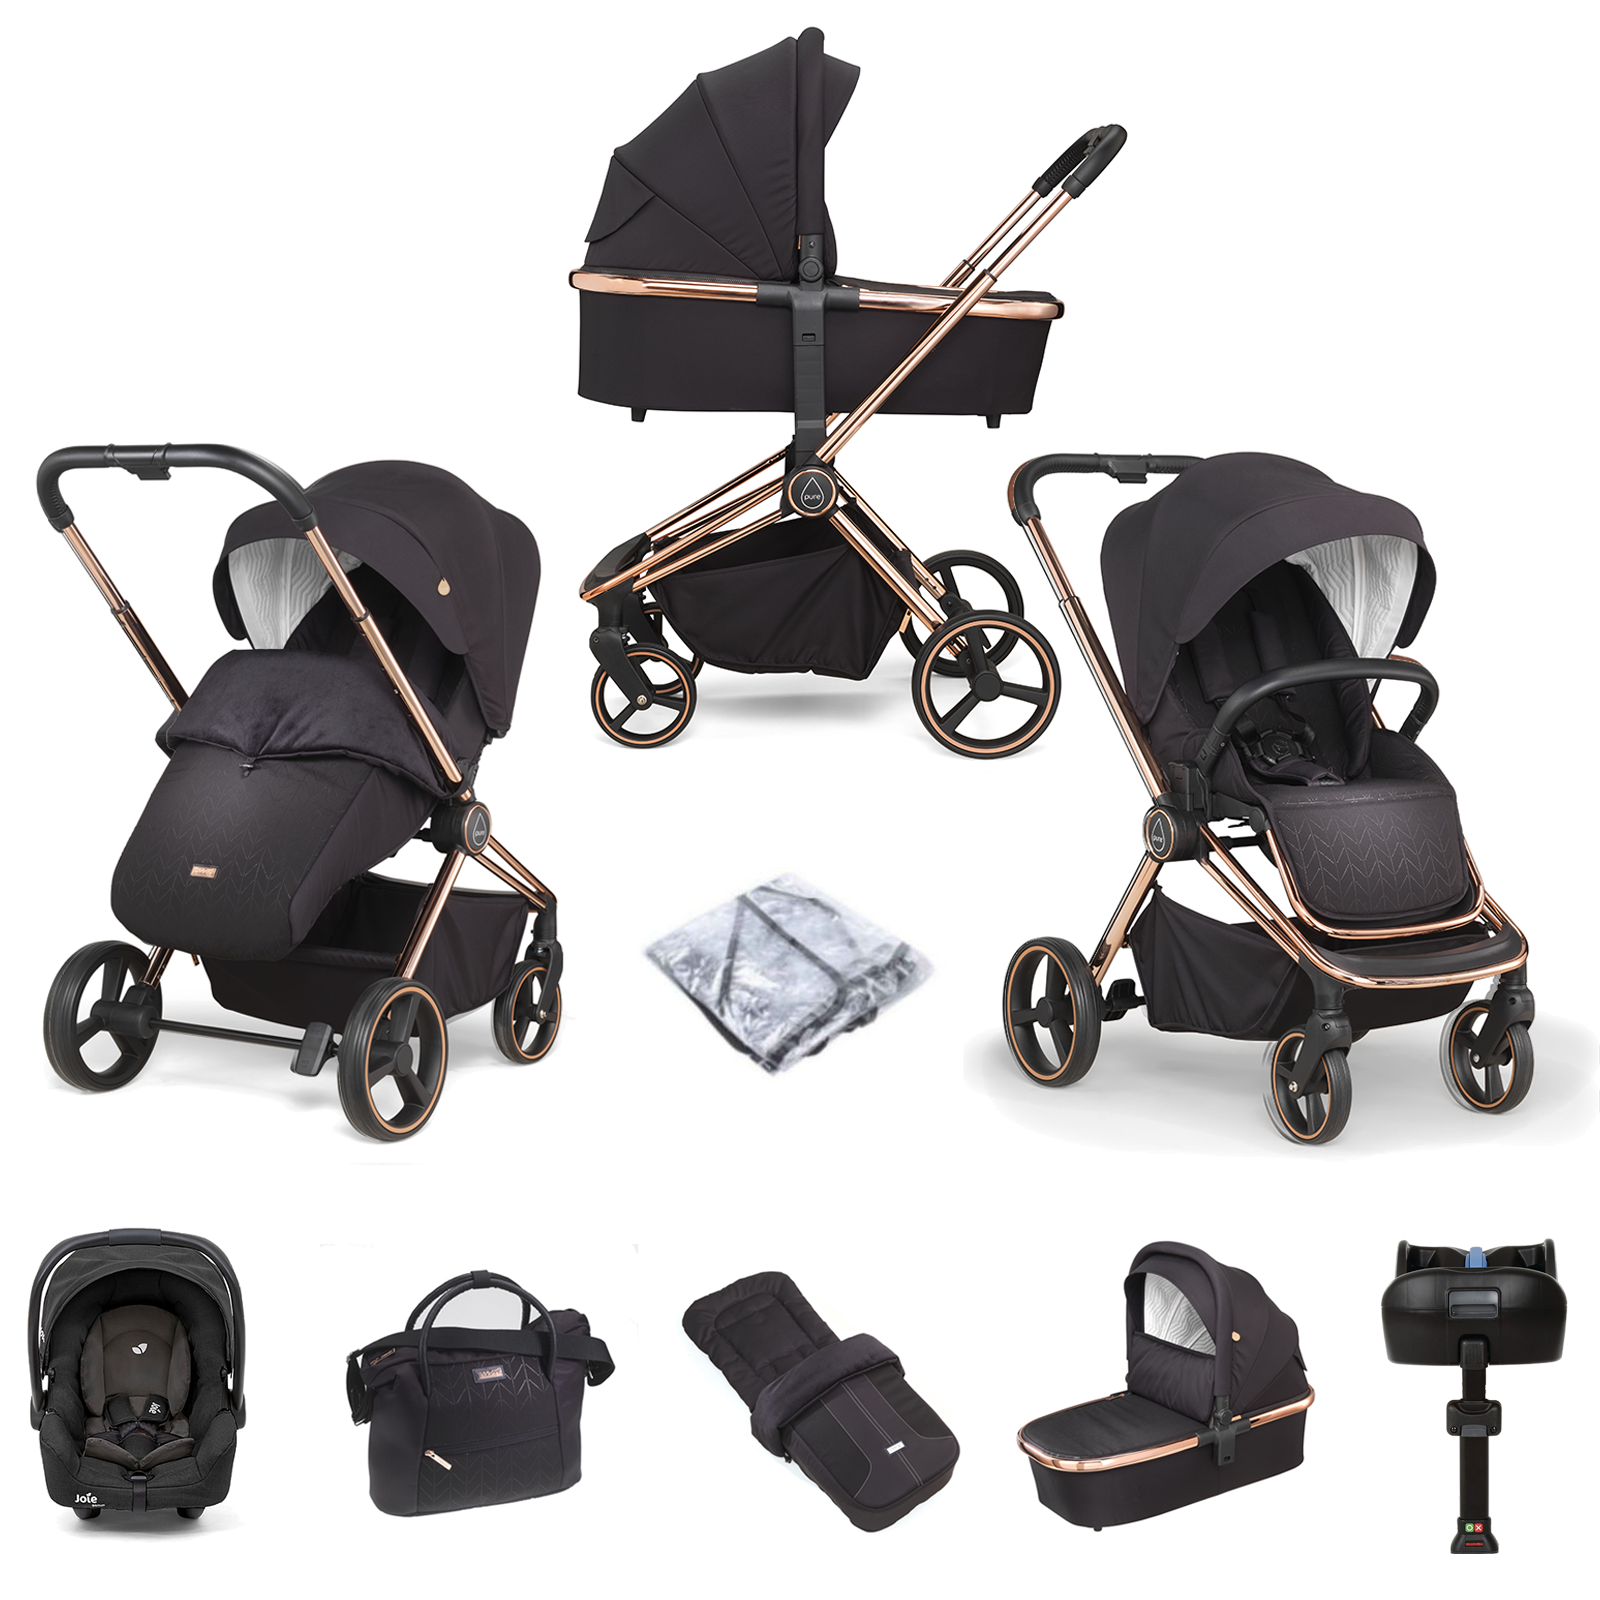 Mee-go Pure (Gemm) ISOFIX Base Travel System & Accessories - Dusty Rose